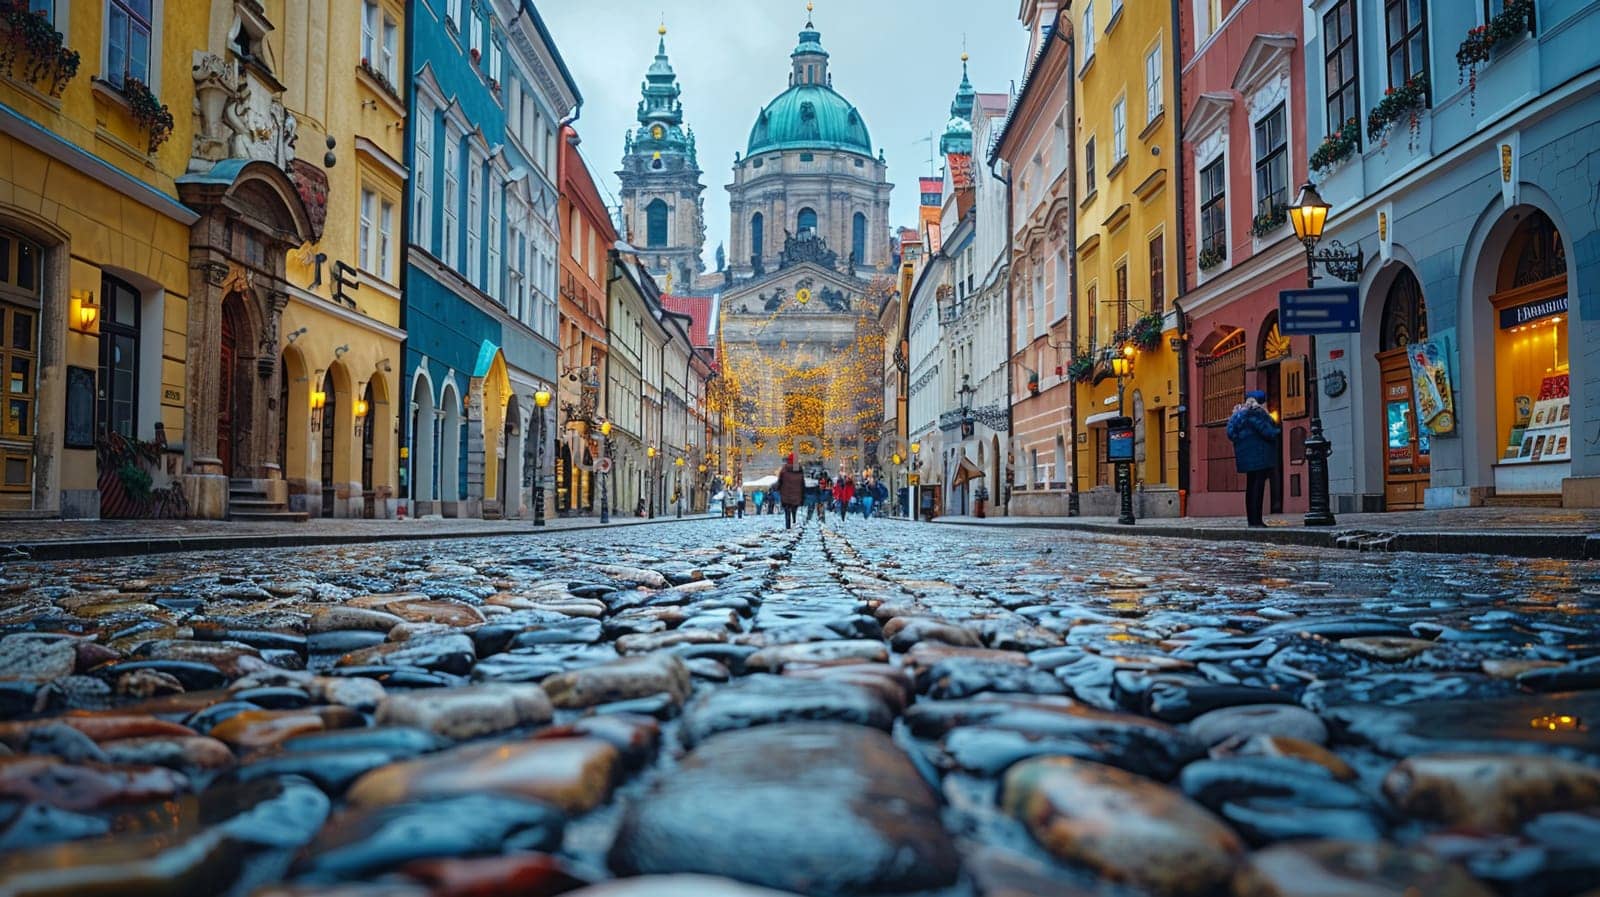 Cobbled Streets of a Historic City Center with Tourists Exploring, The blur of foot traffic against old buildings suggests the ongoing dance of history and modernity.